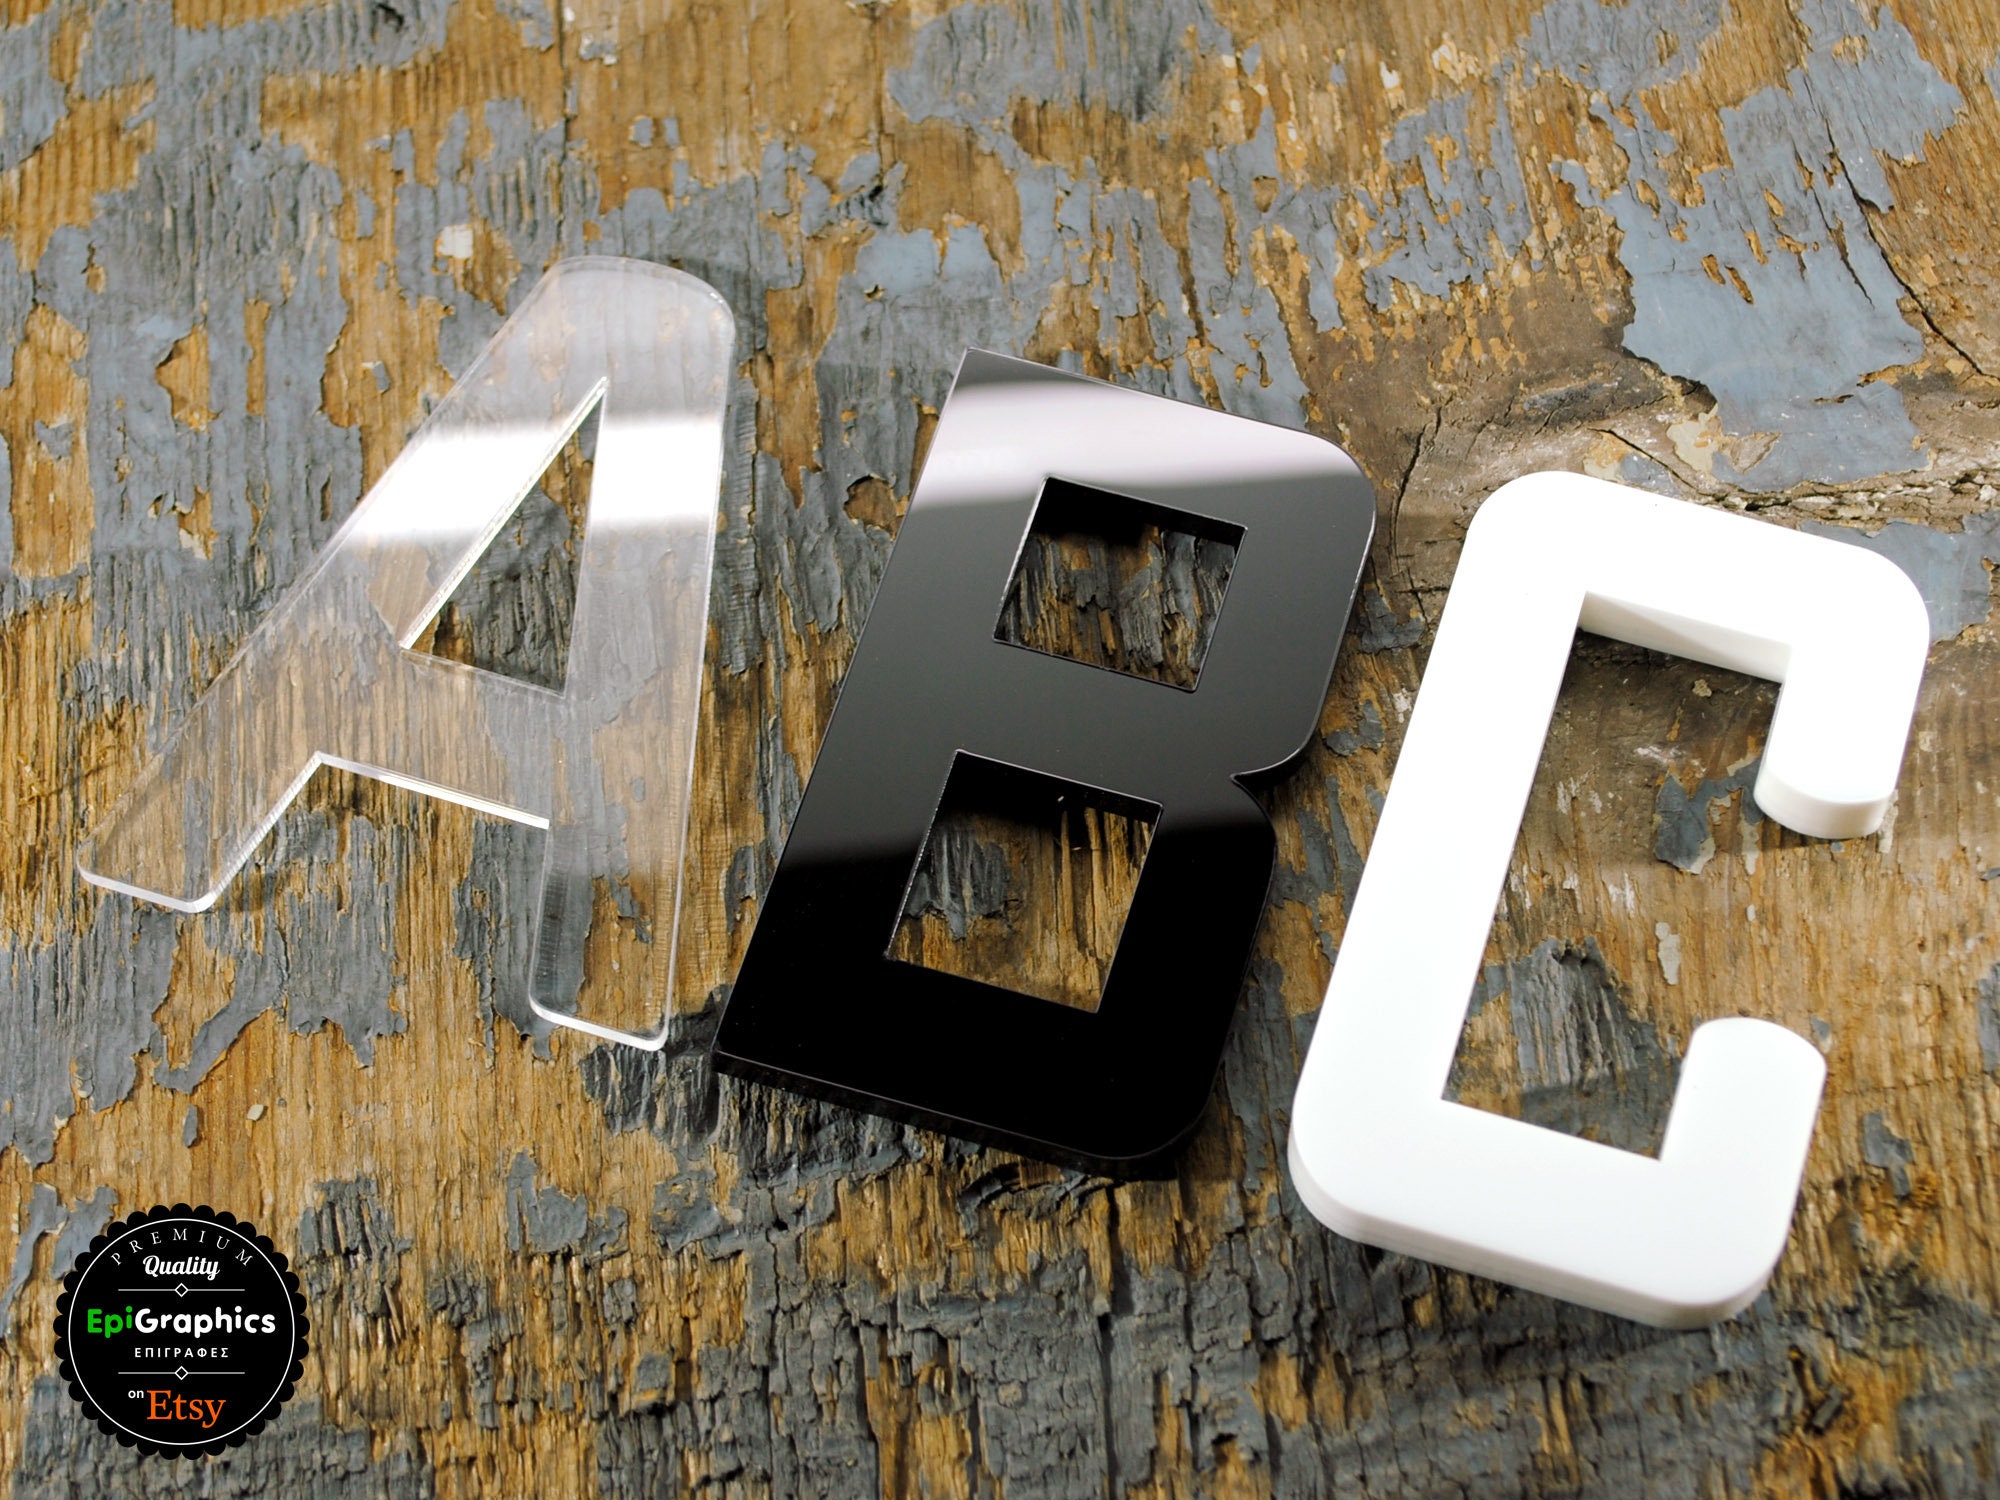 Acrylic Letters and Numbers 3mm / 5mm / 10mm 